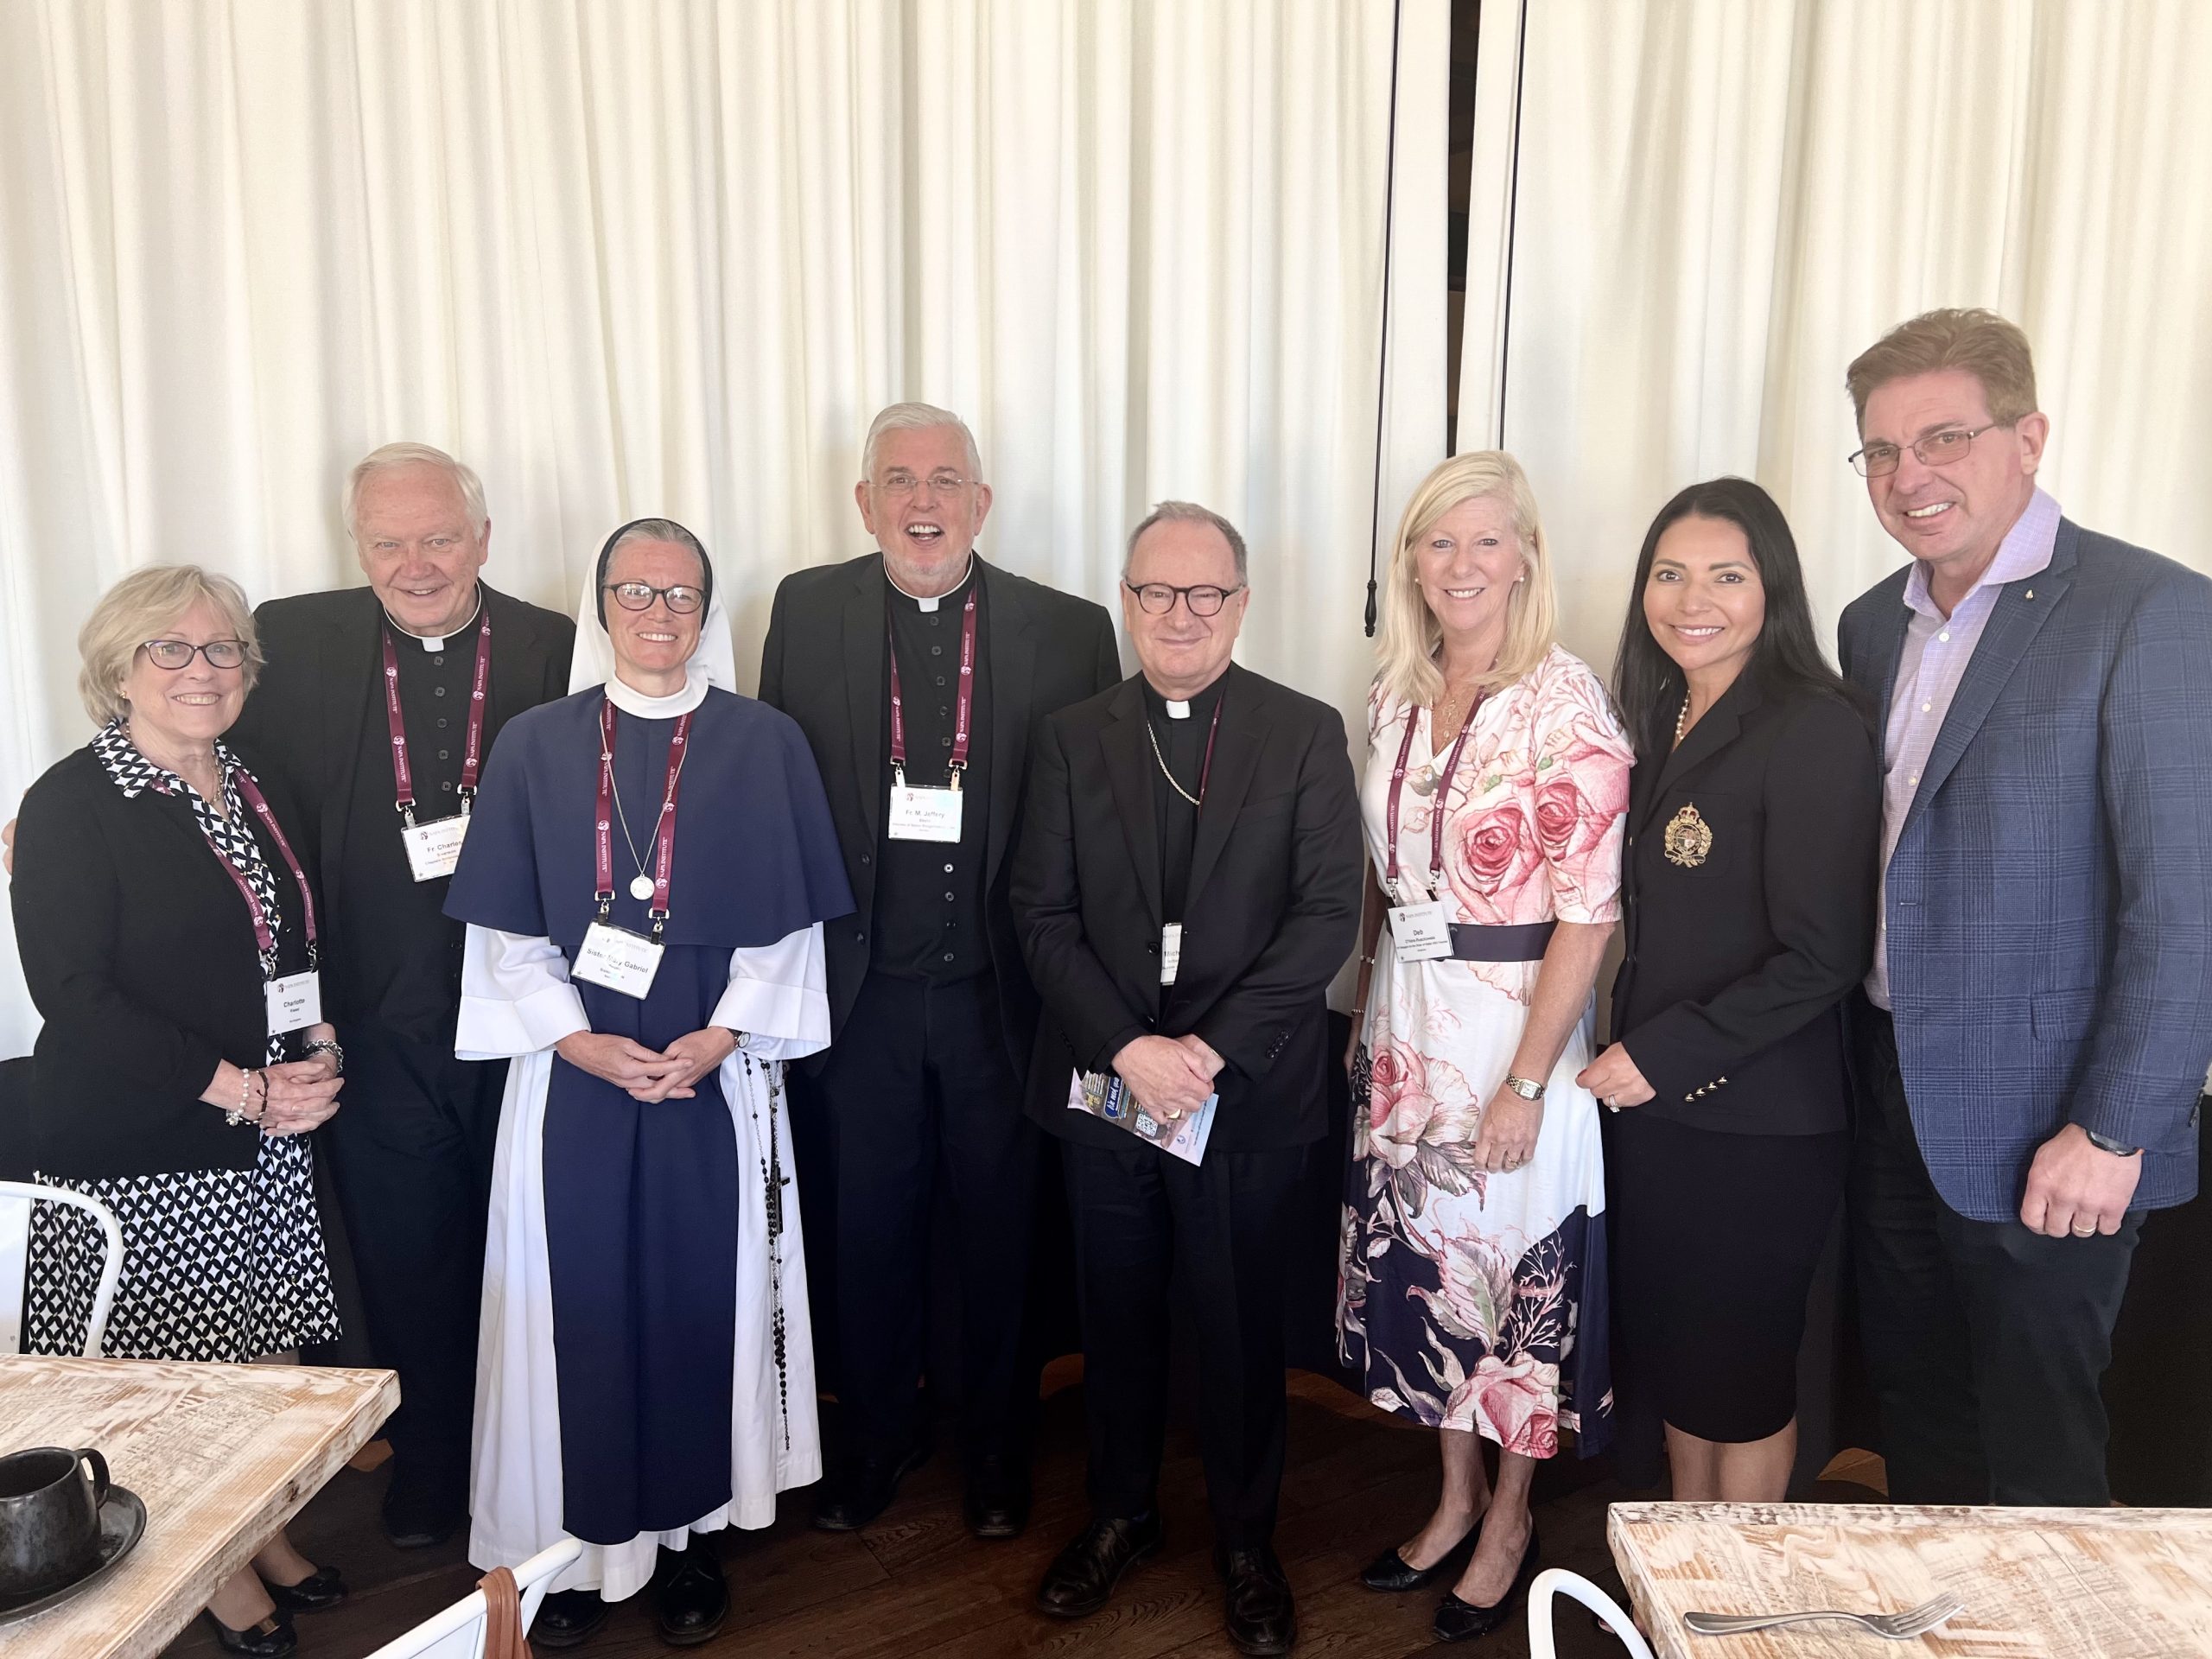 Exploring Catholic Solutions to Human Trafficking: Special Advisor Deborah O’Hara Rusckowski gave a presentation at the Napa Institute’s 2023 Summer Conference